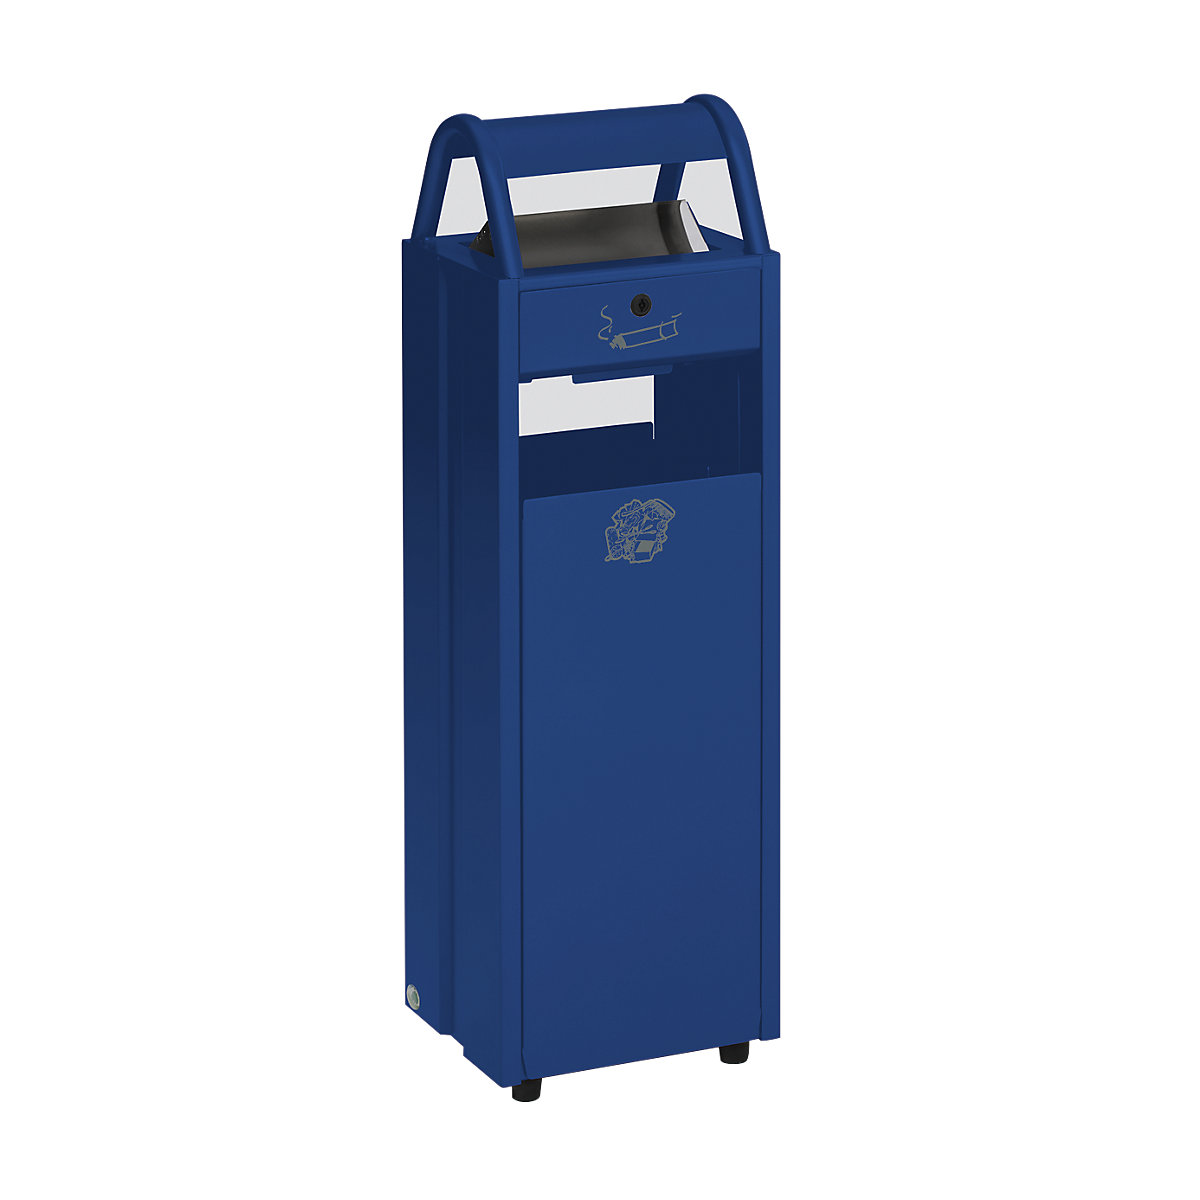 VAR – Waste collector with ashtray, capacity 35 l, WxHxD 300 x 960 x 250 mm, blue RAL 5010